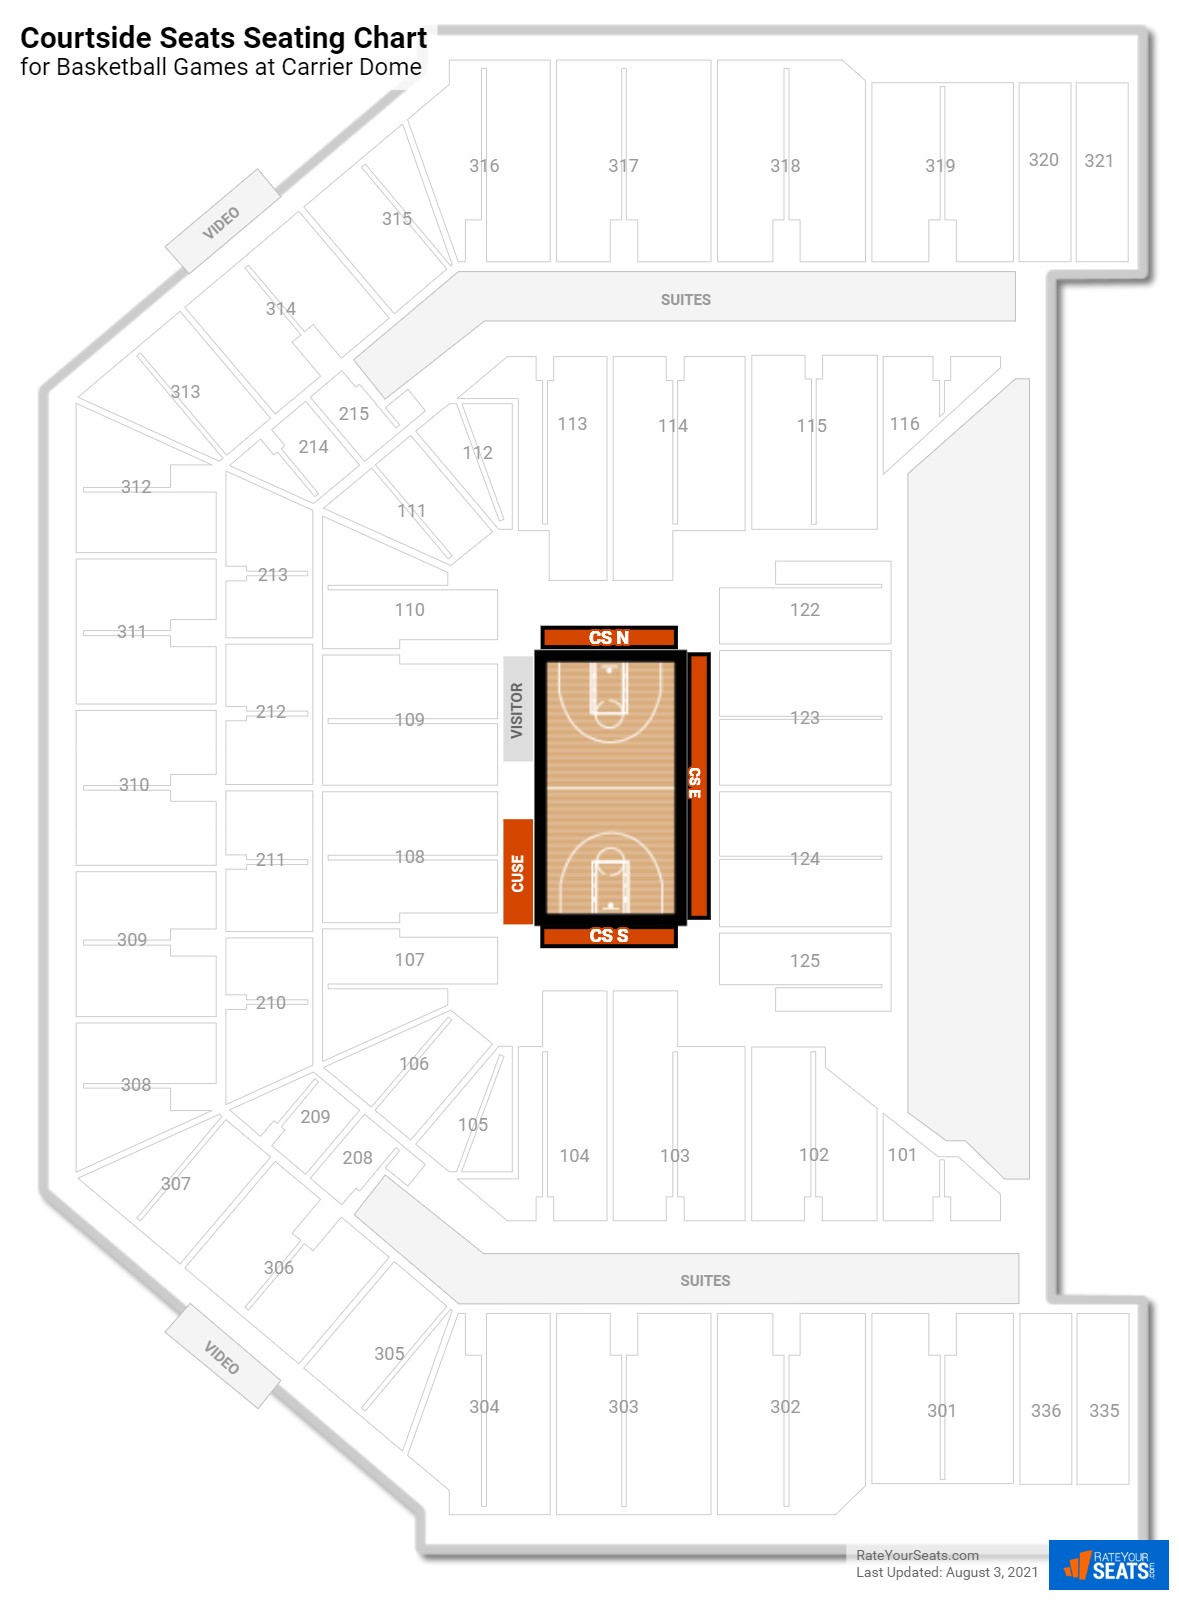 Basketball Courtside Seats Seating Chart at Carrier Dome